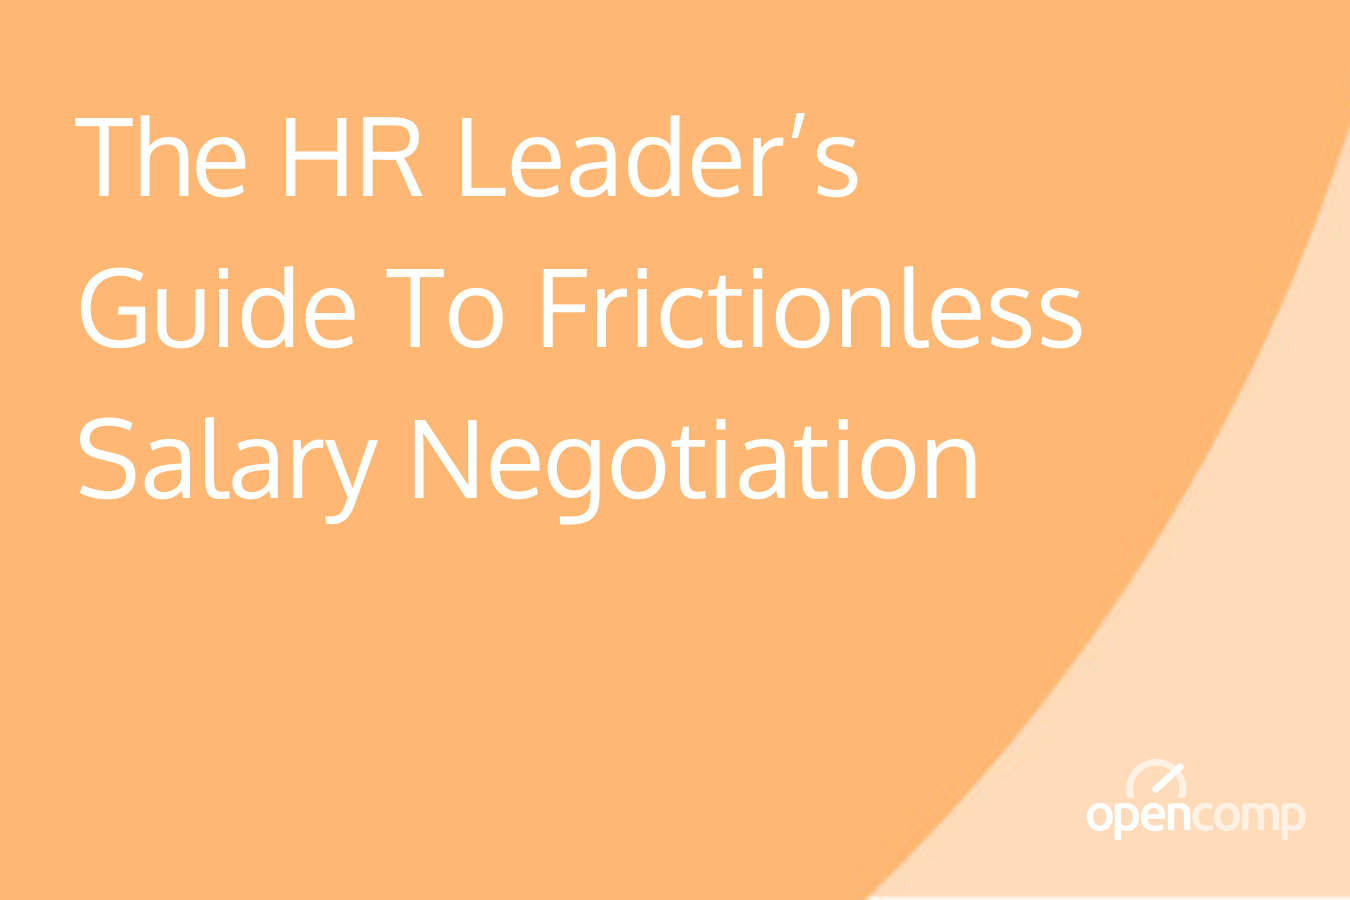 The HR Leader’s Guide To Frictionless Salary Negotiation